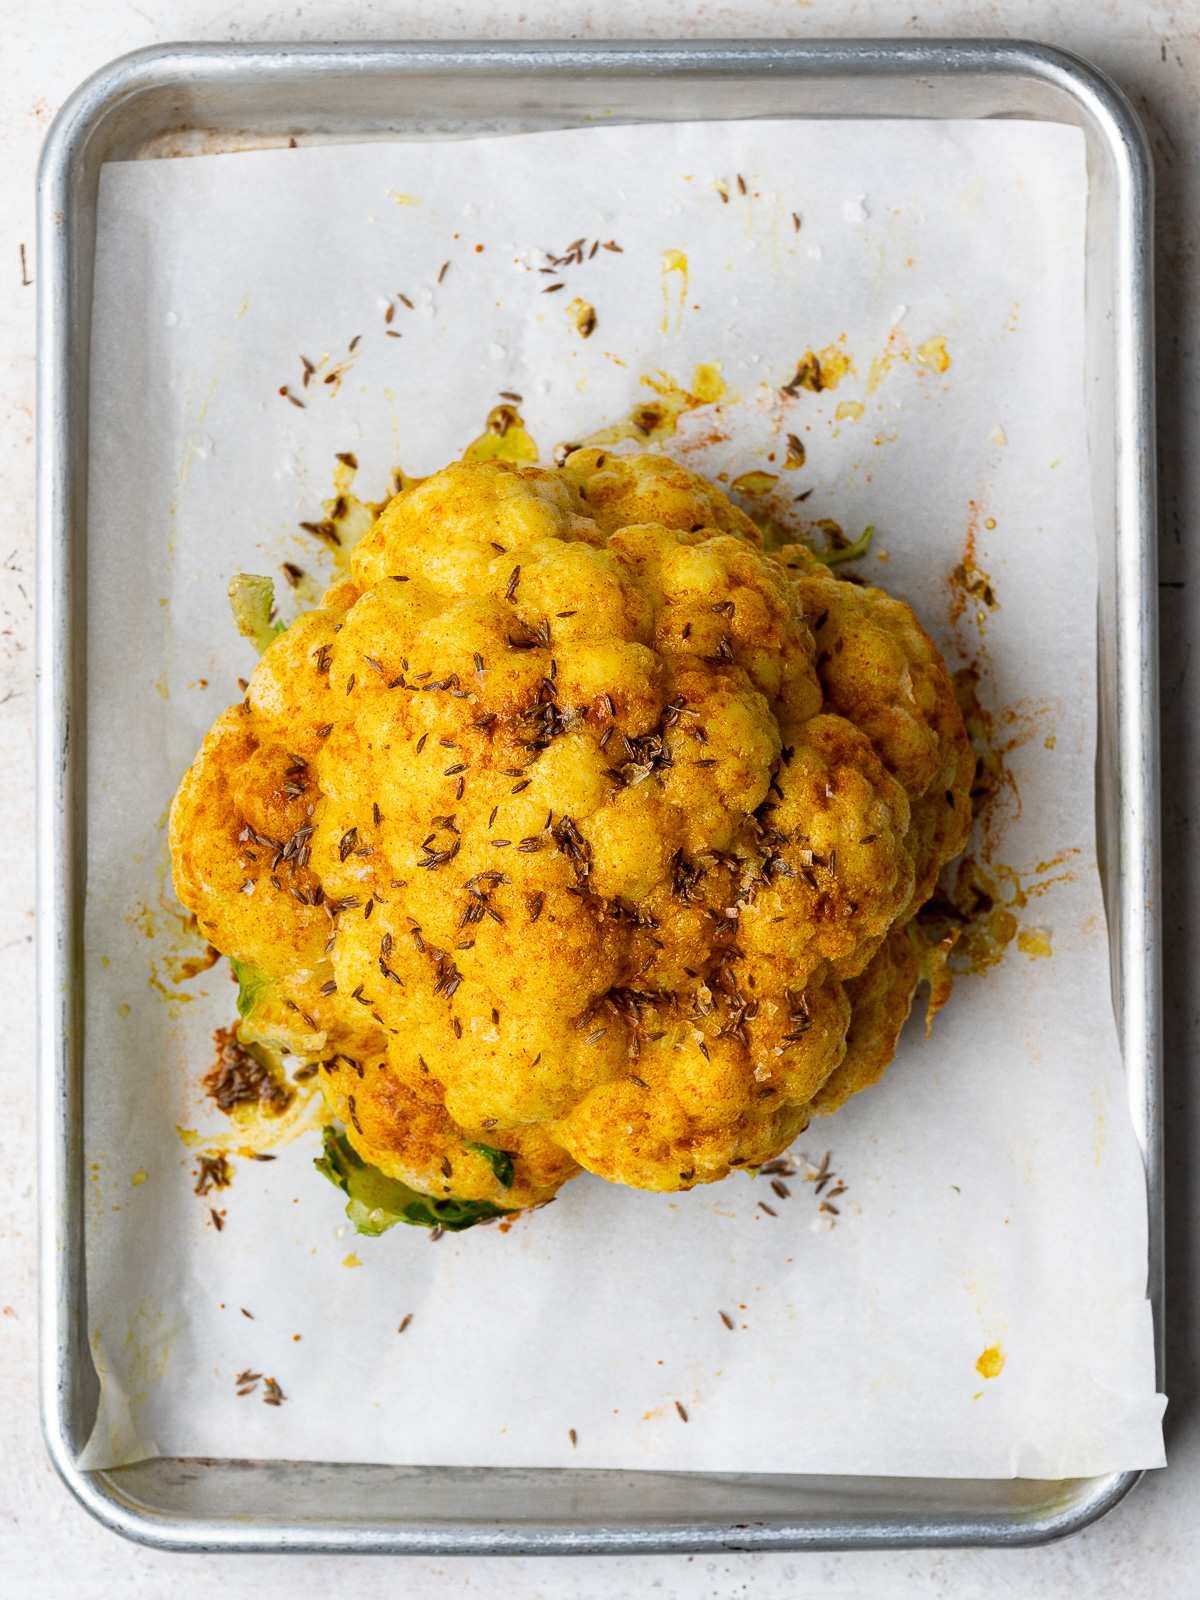 cauliflower rubbed with olive oil and spices before roasting